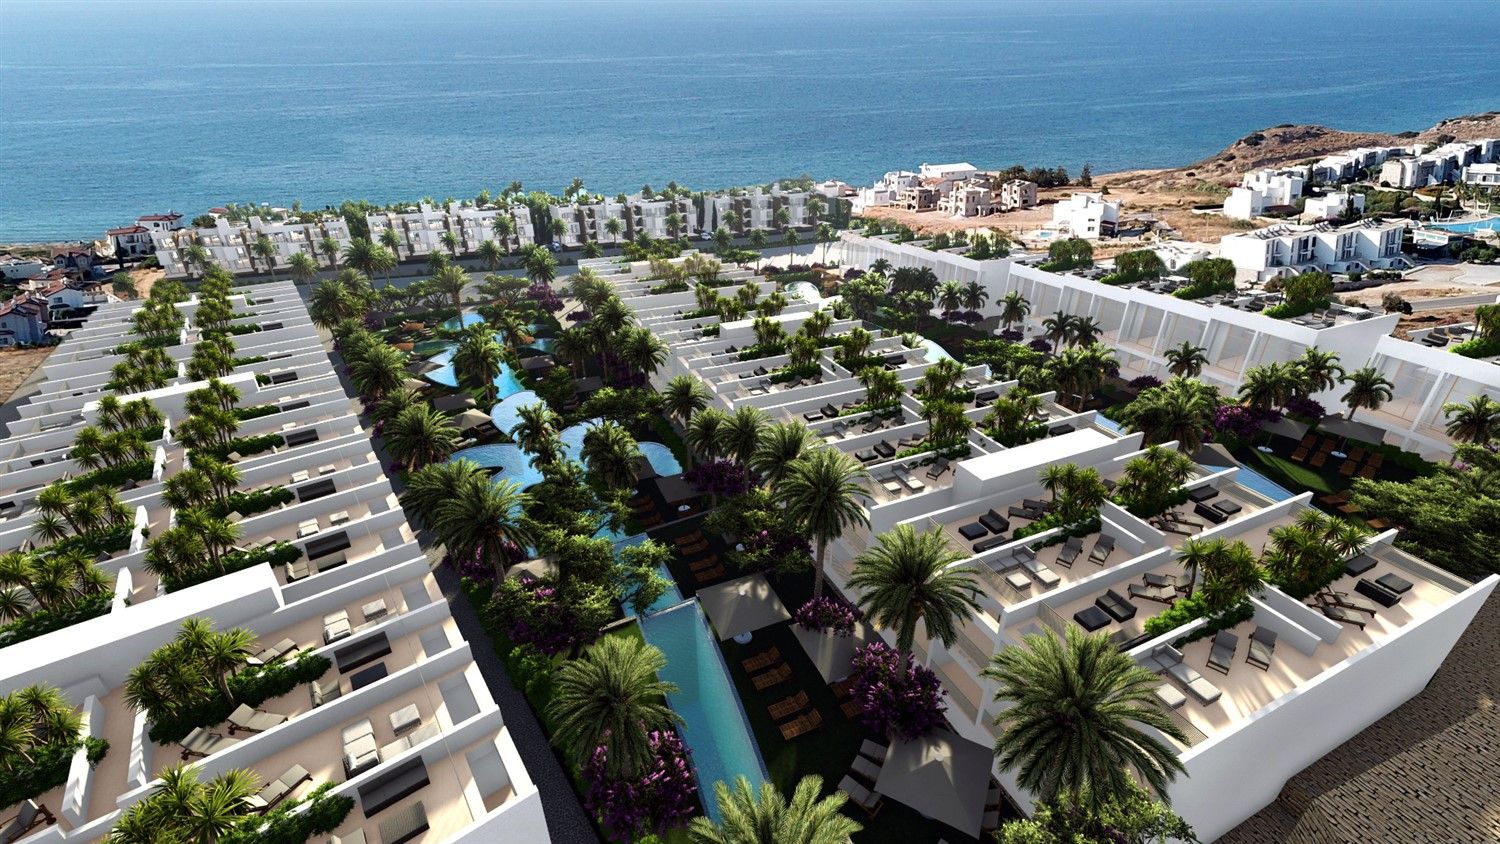 New residential project on the first coastline - Northern Cyprus, Girne 